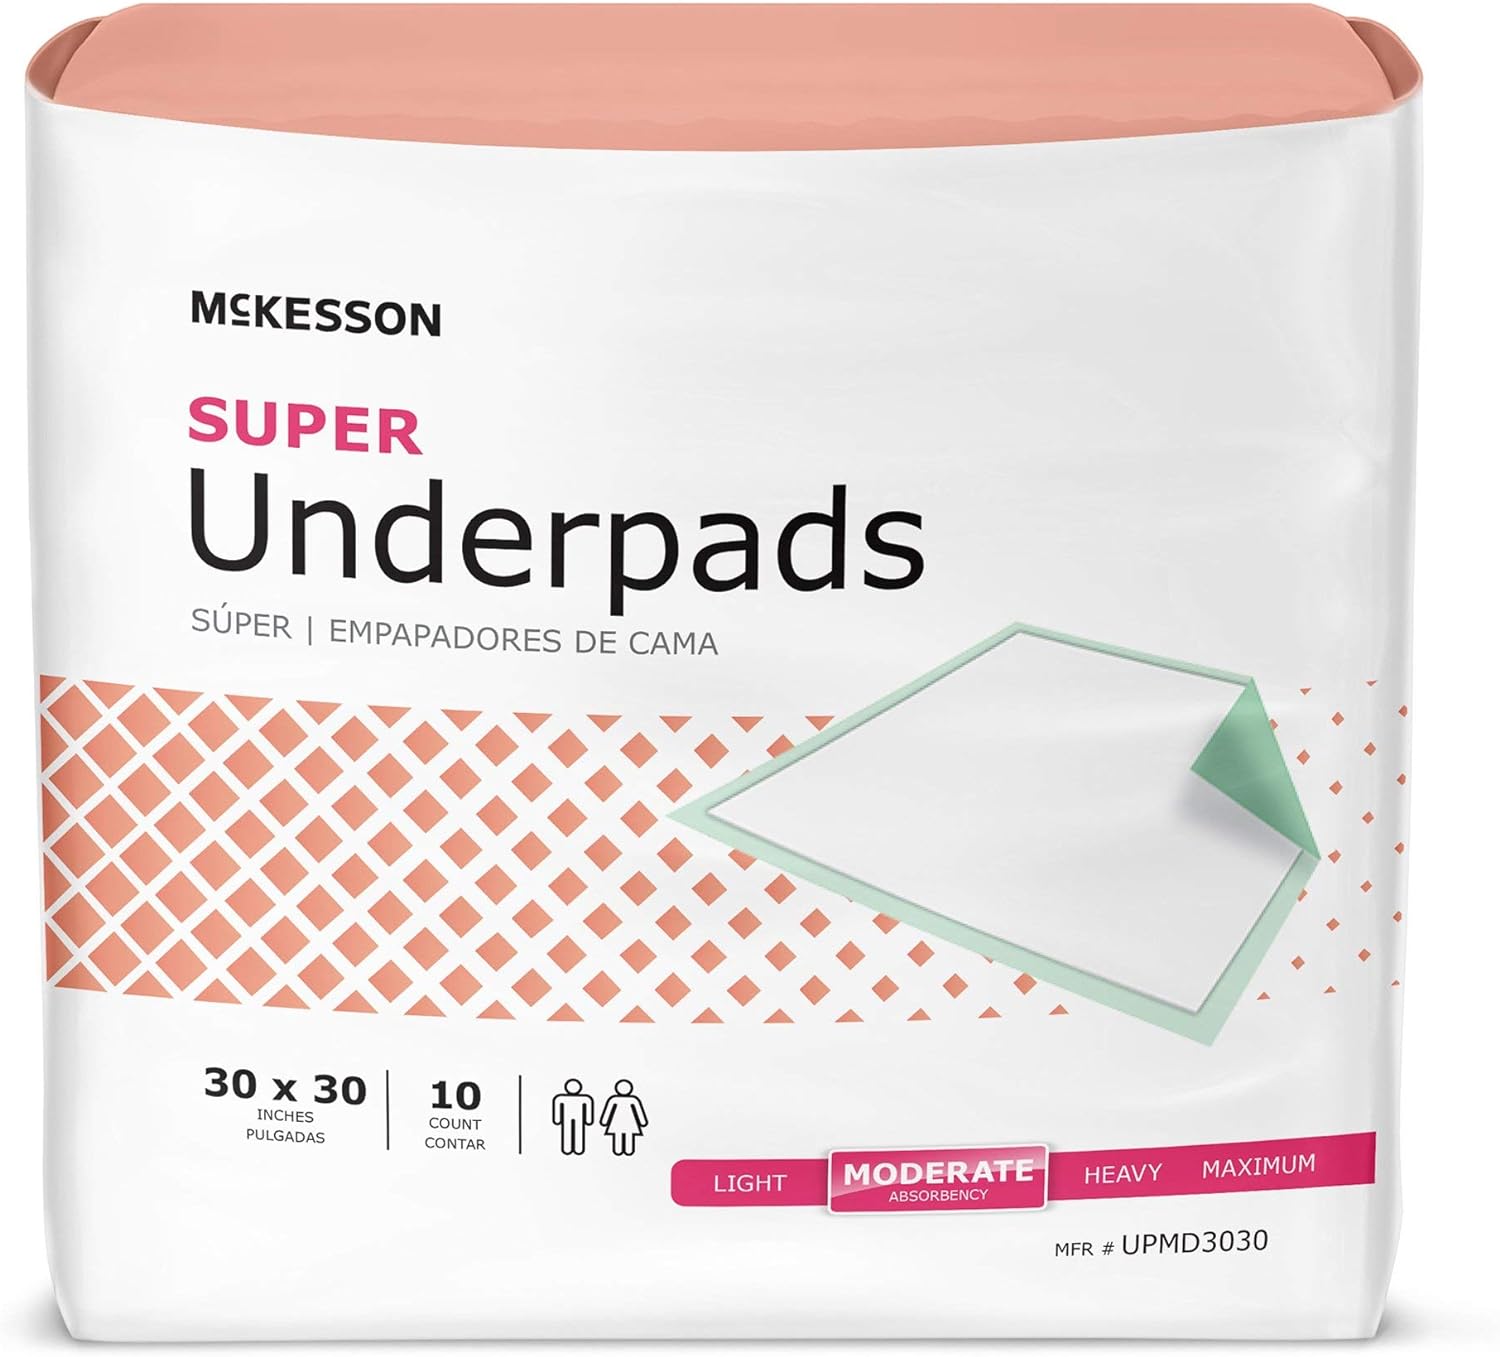 McKesson Super Underpads, Incontinence Bed Pads, Moderate Absorbency, 30 in x 30 in, 10 Count